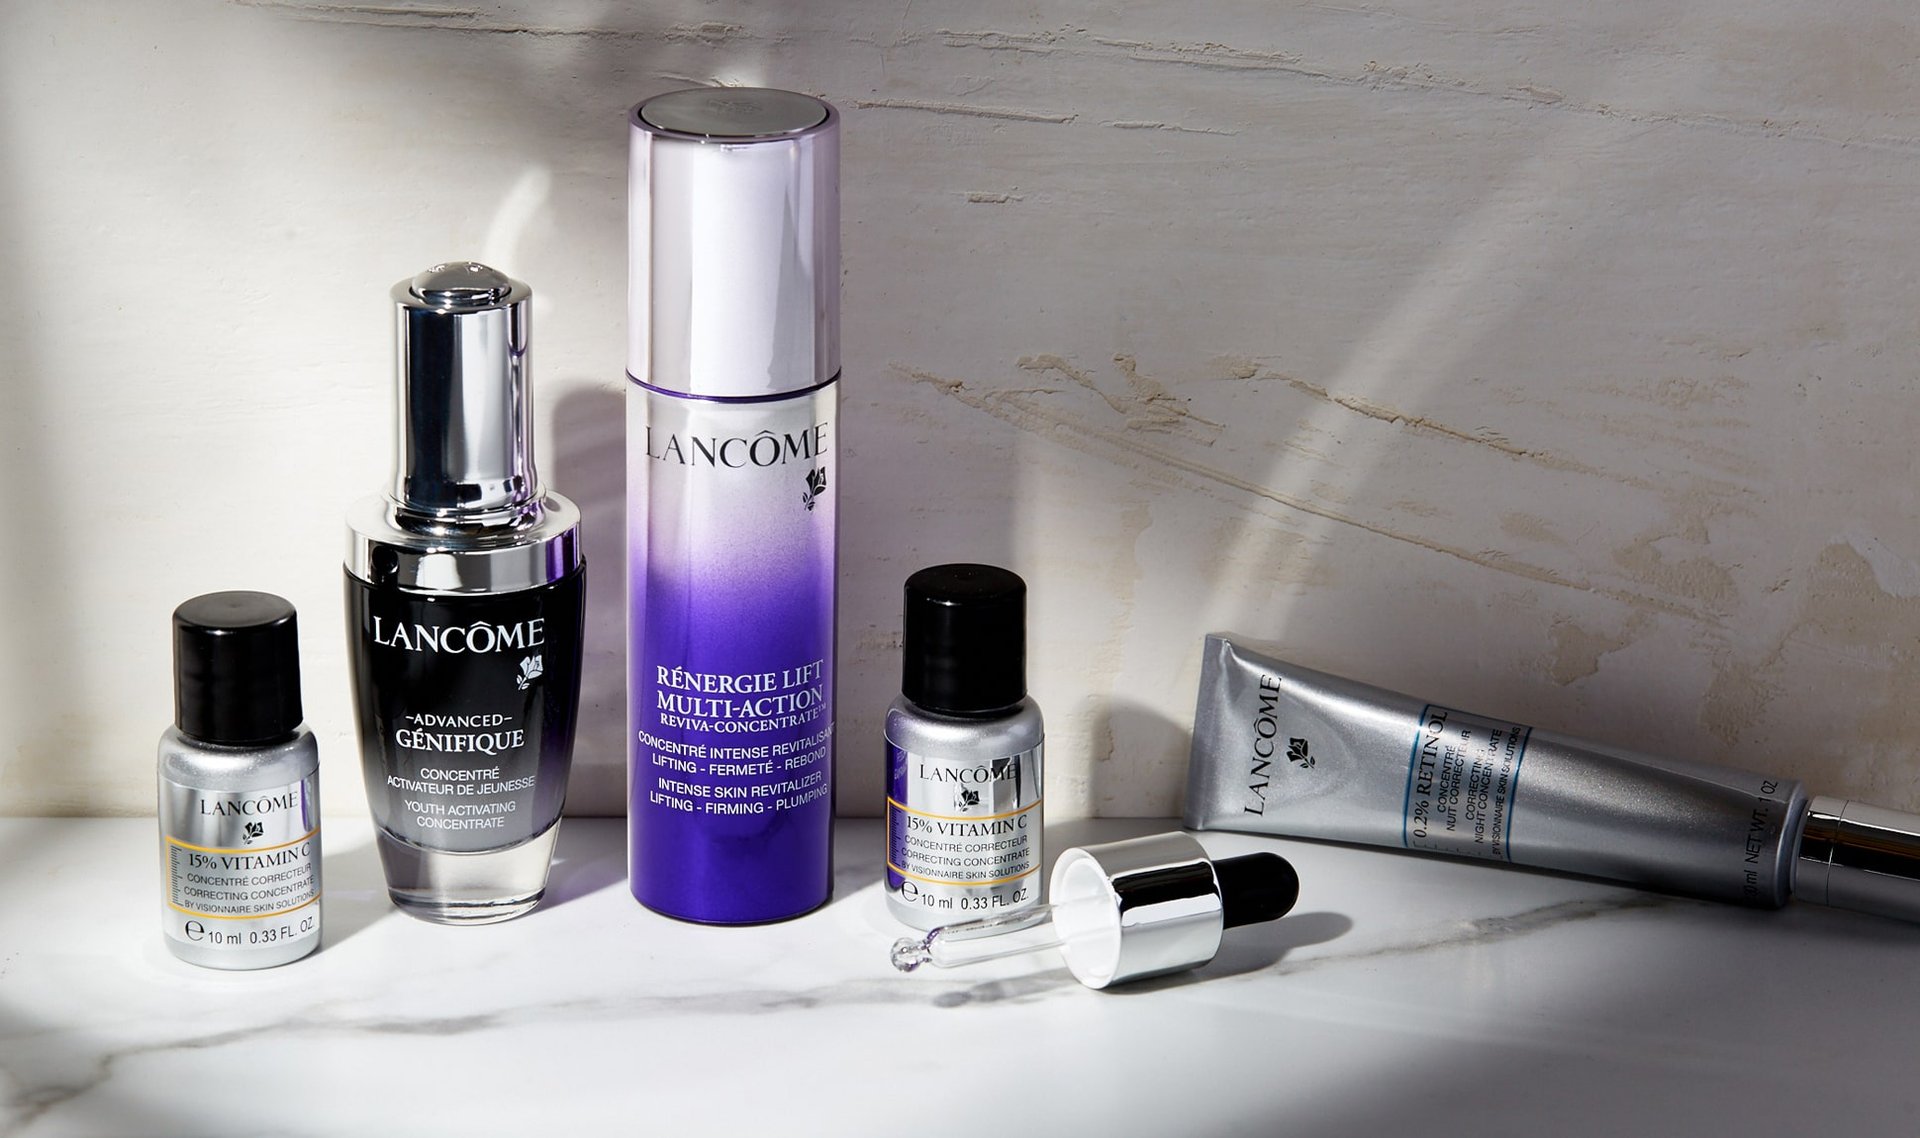 We Reviewed 5 Top Lancôme Face Serums — Here Are Our Thoughts 